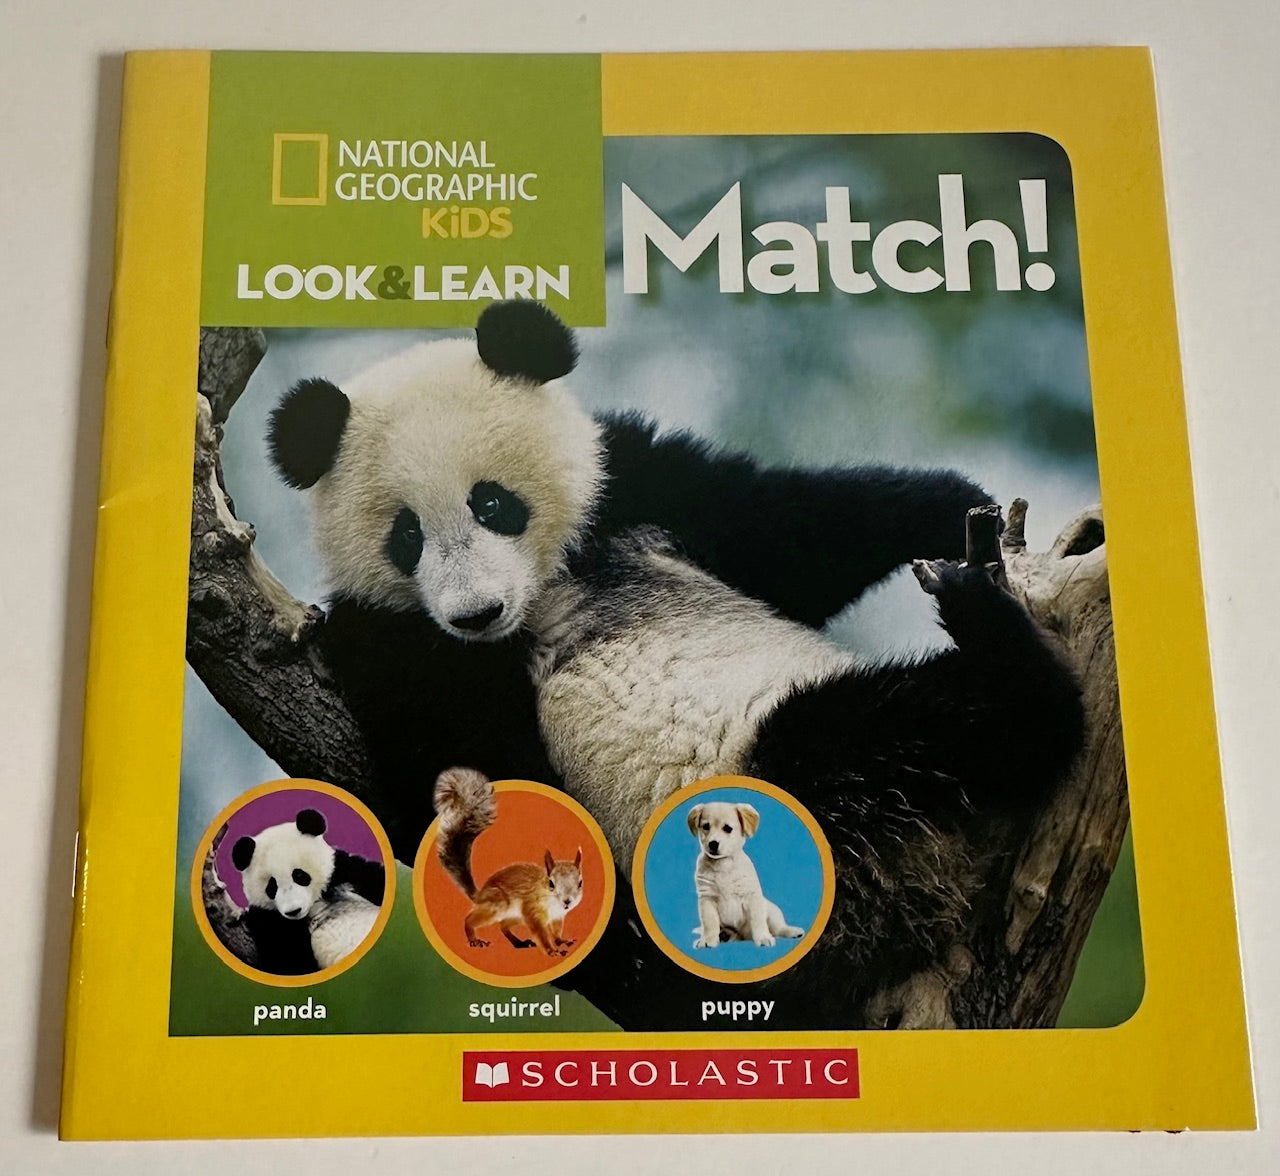 National Geographic Kids, "Look and Learn: Match!"